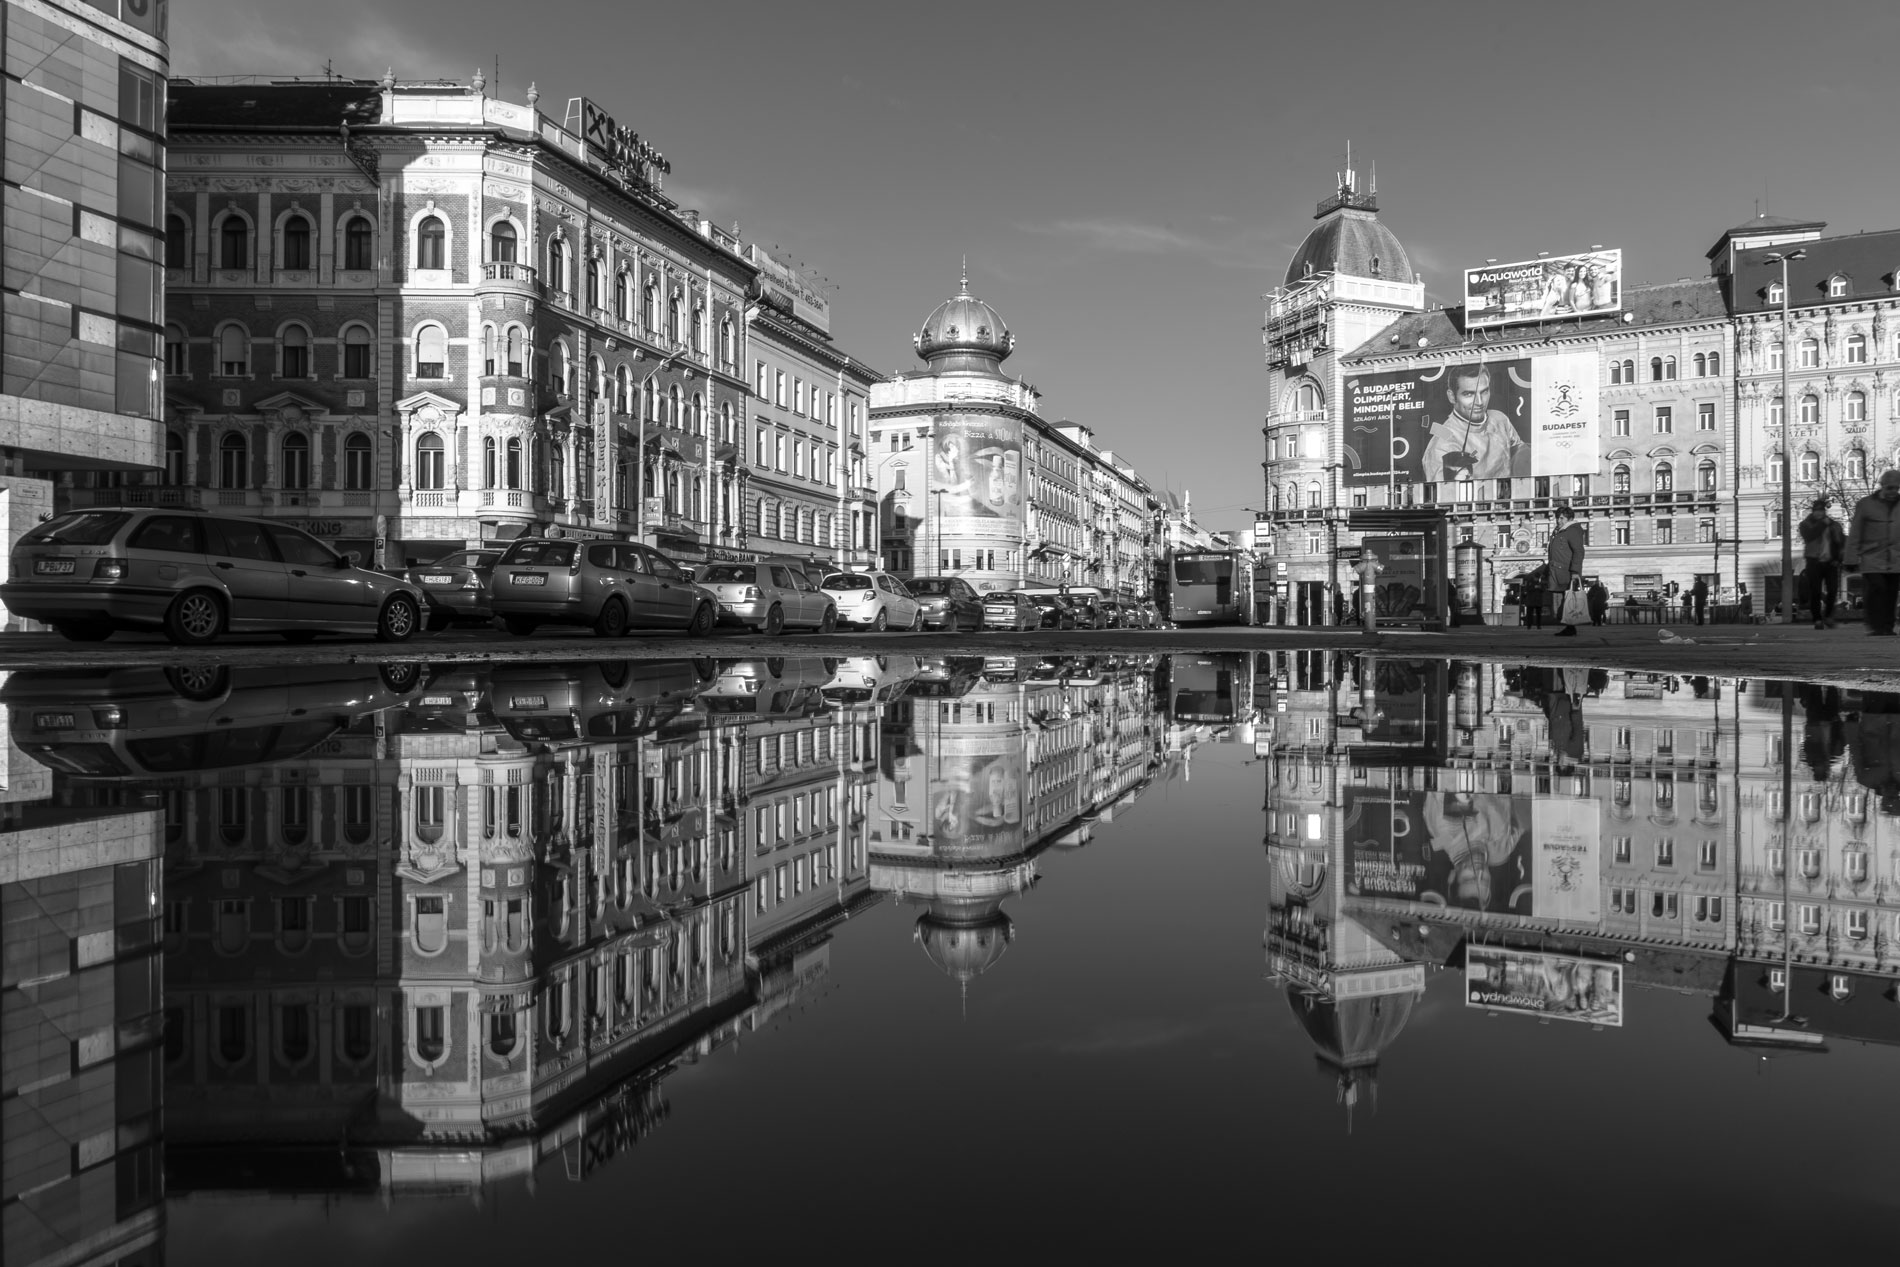 photography_atthary_budapest_reflection_26